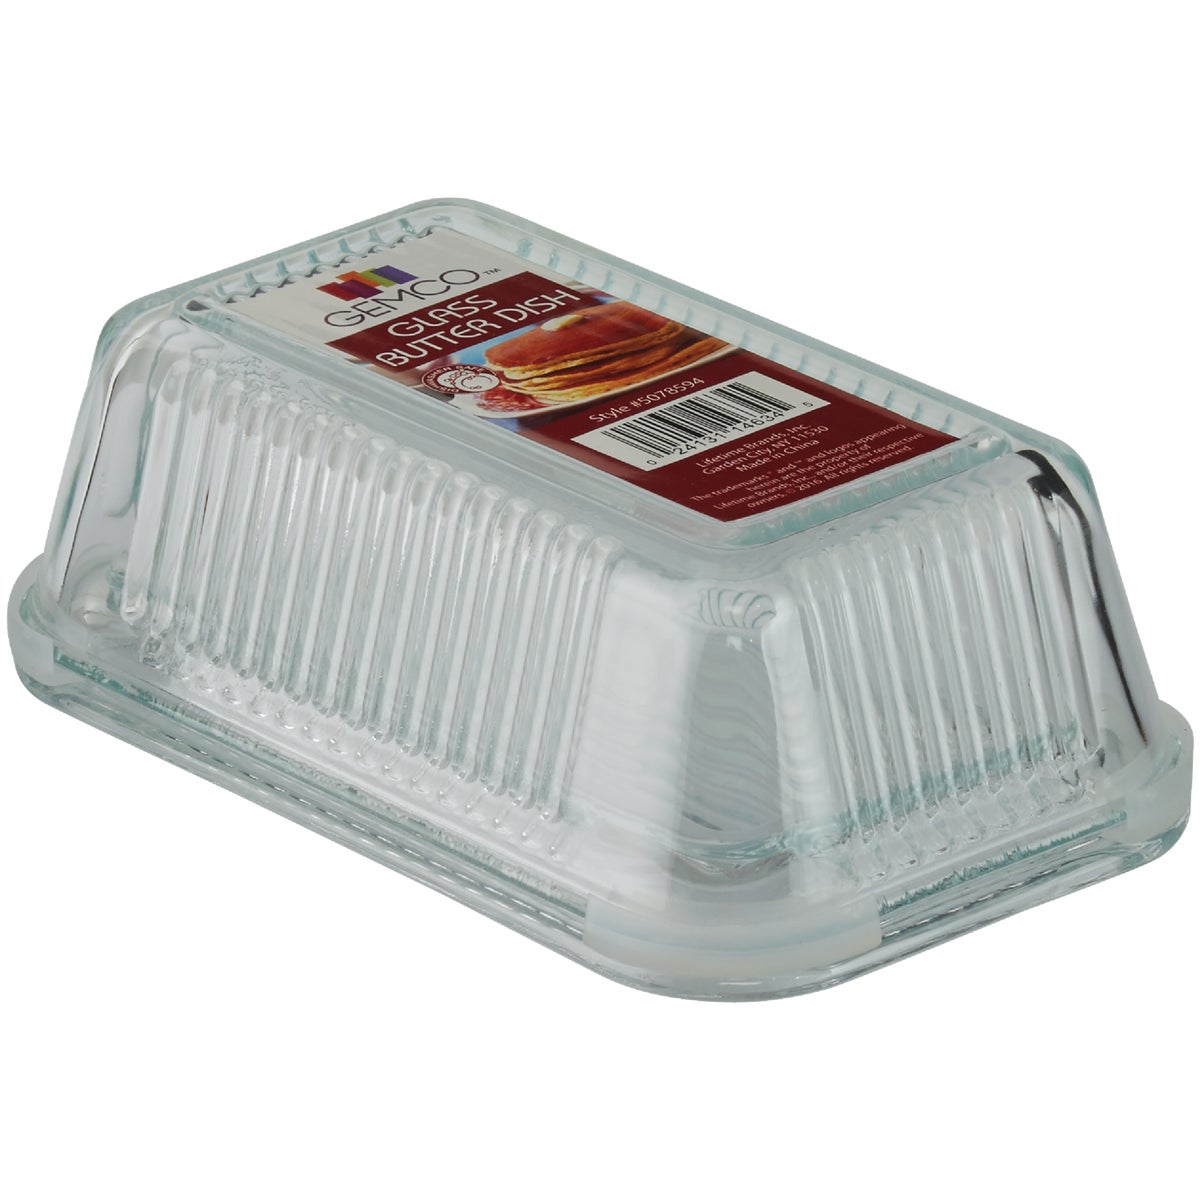 Gemco Multi Function Butter Dish